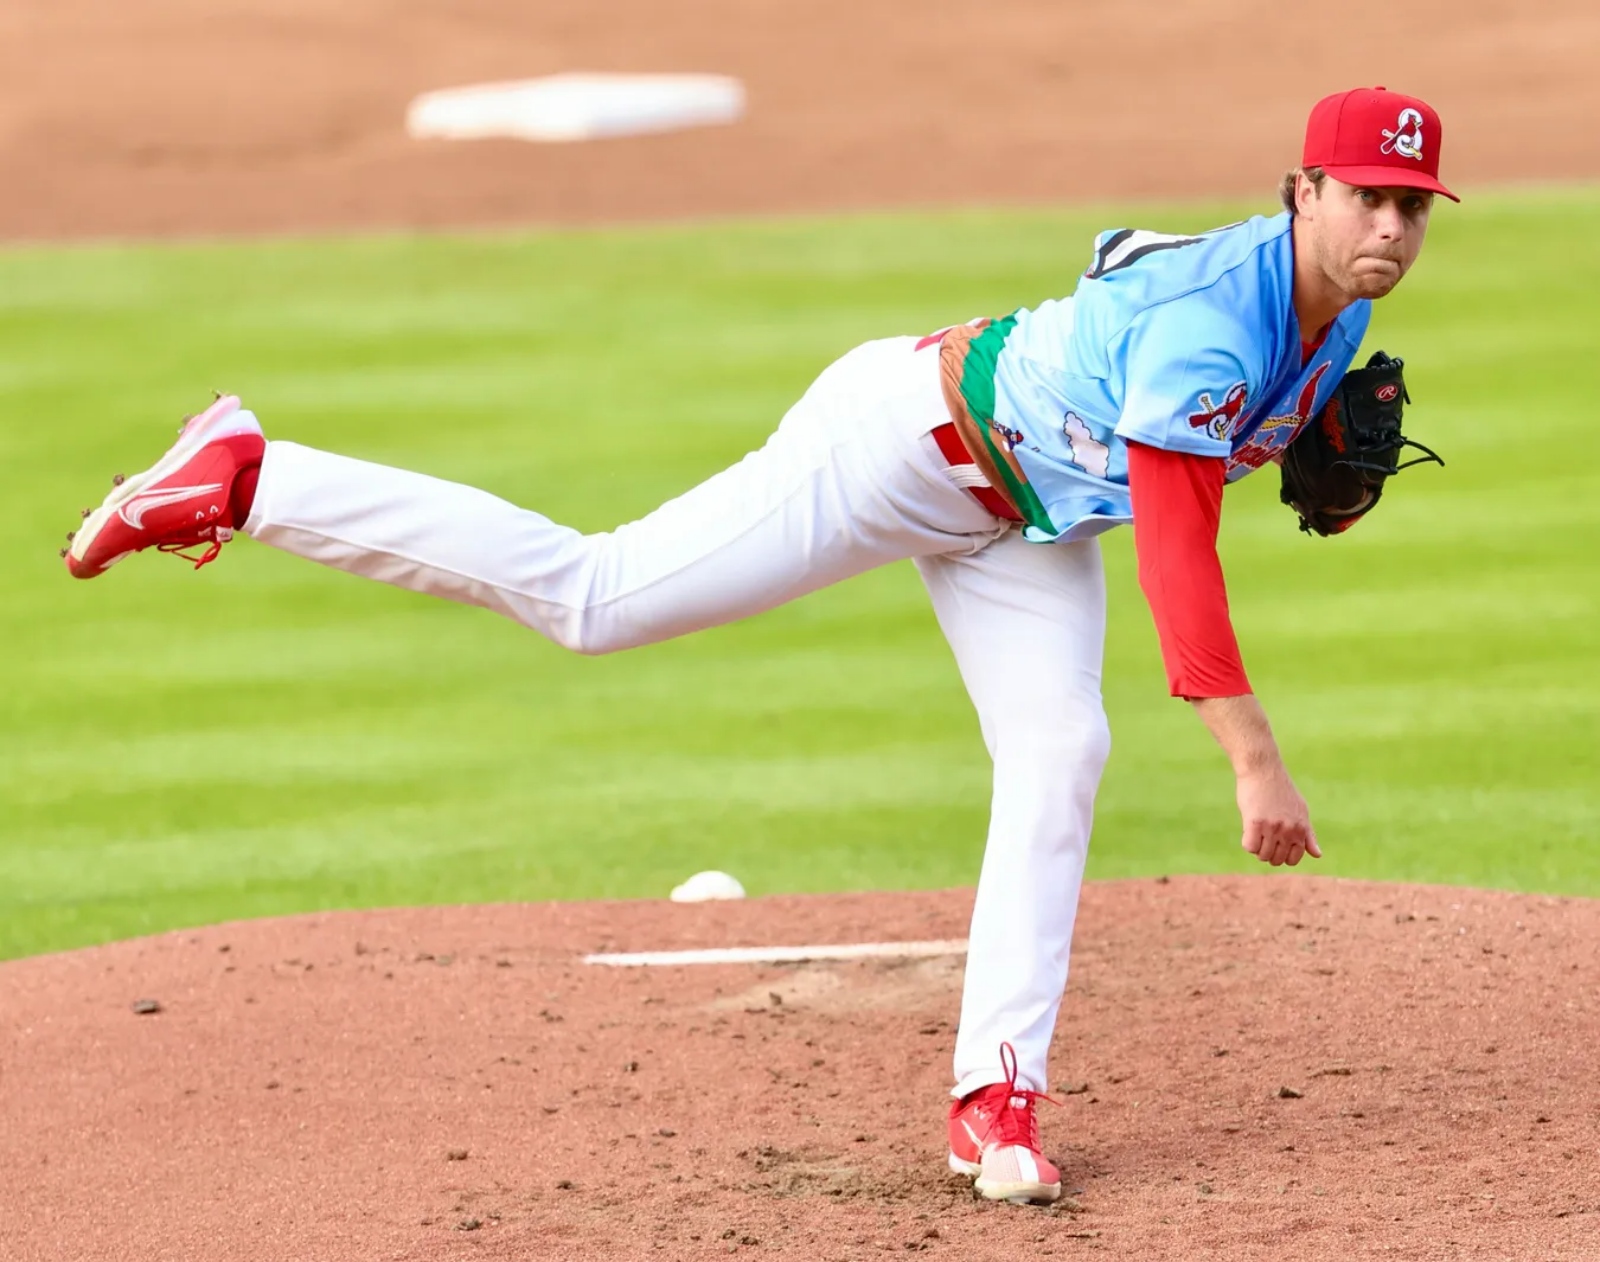 Kyle Leahy, wearing a Springfield Cardinals uniform, pitches the baseball during a game at Hammons Field in Springfield, Missouri.